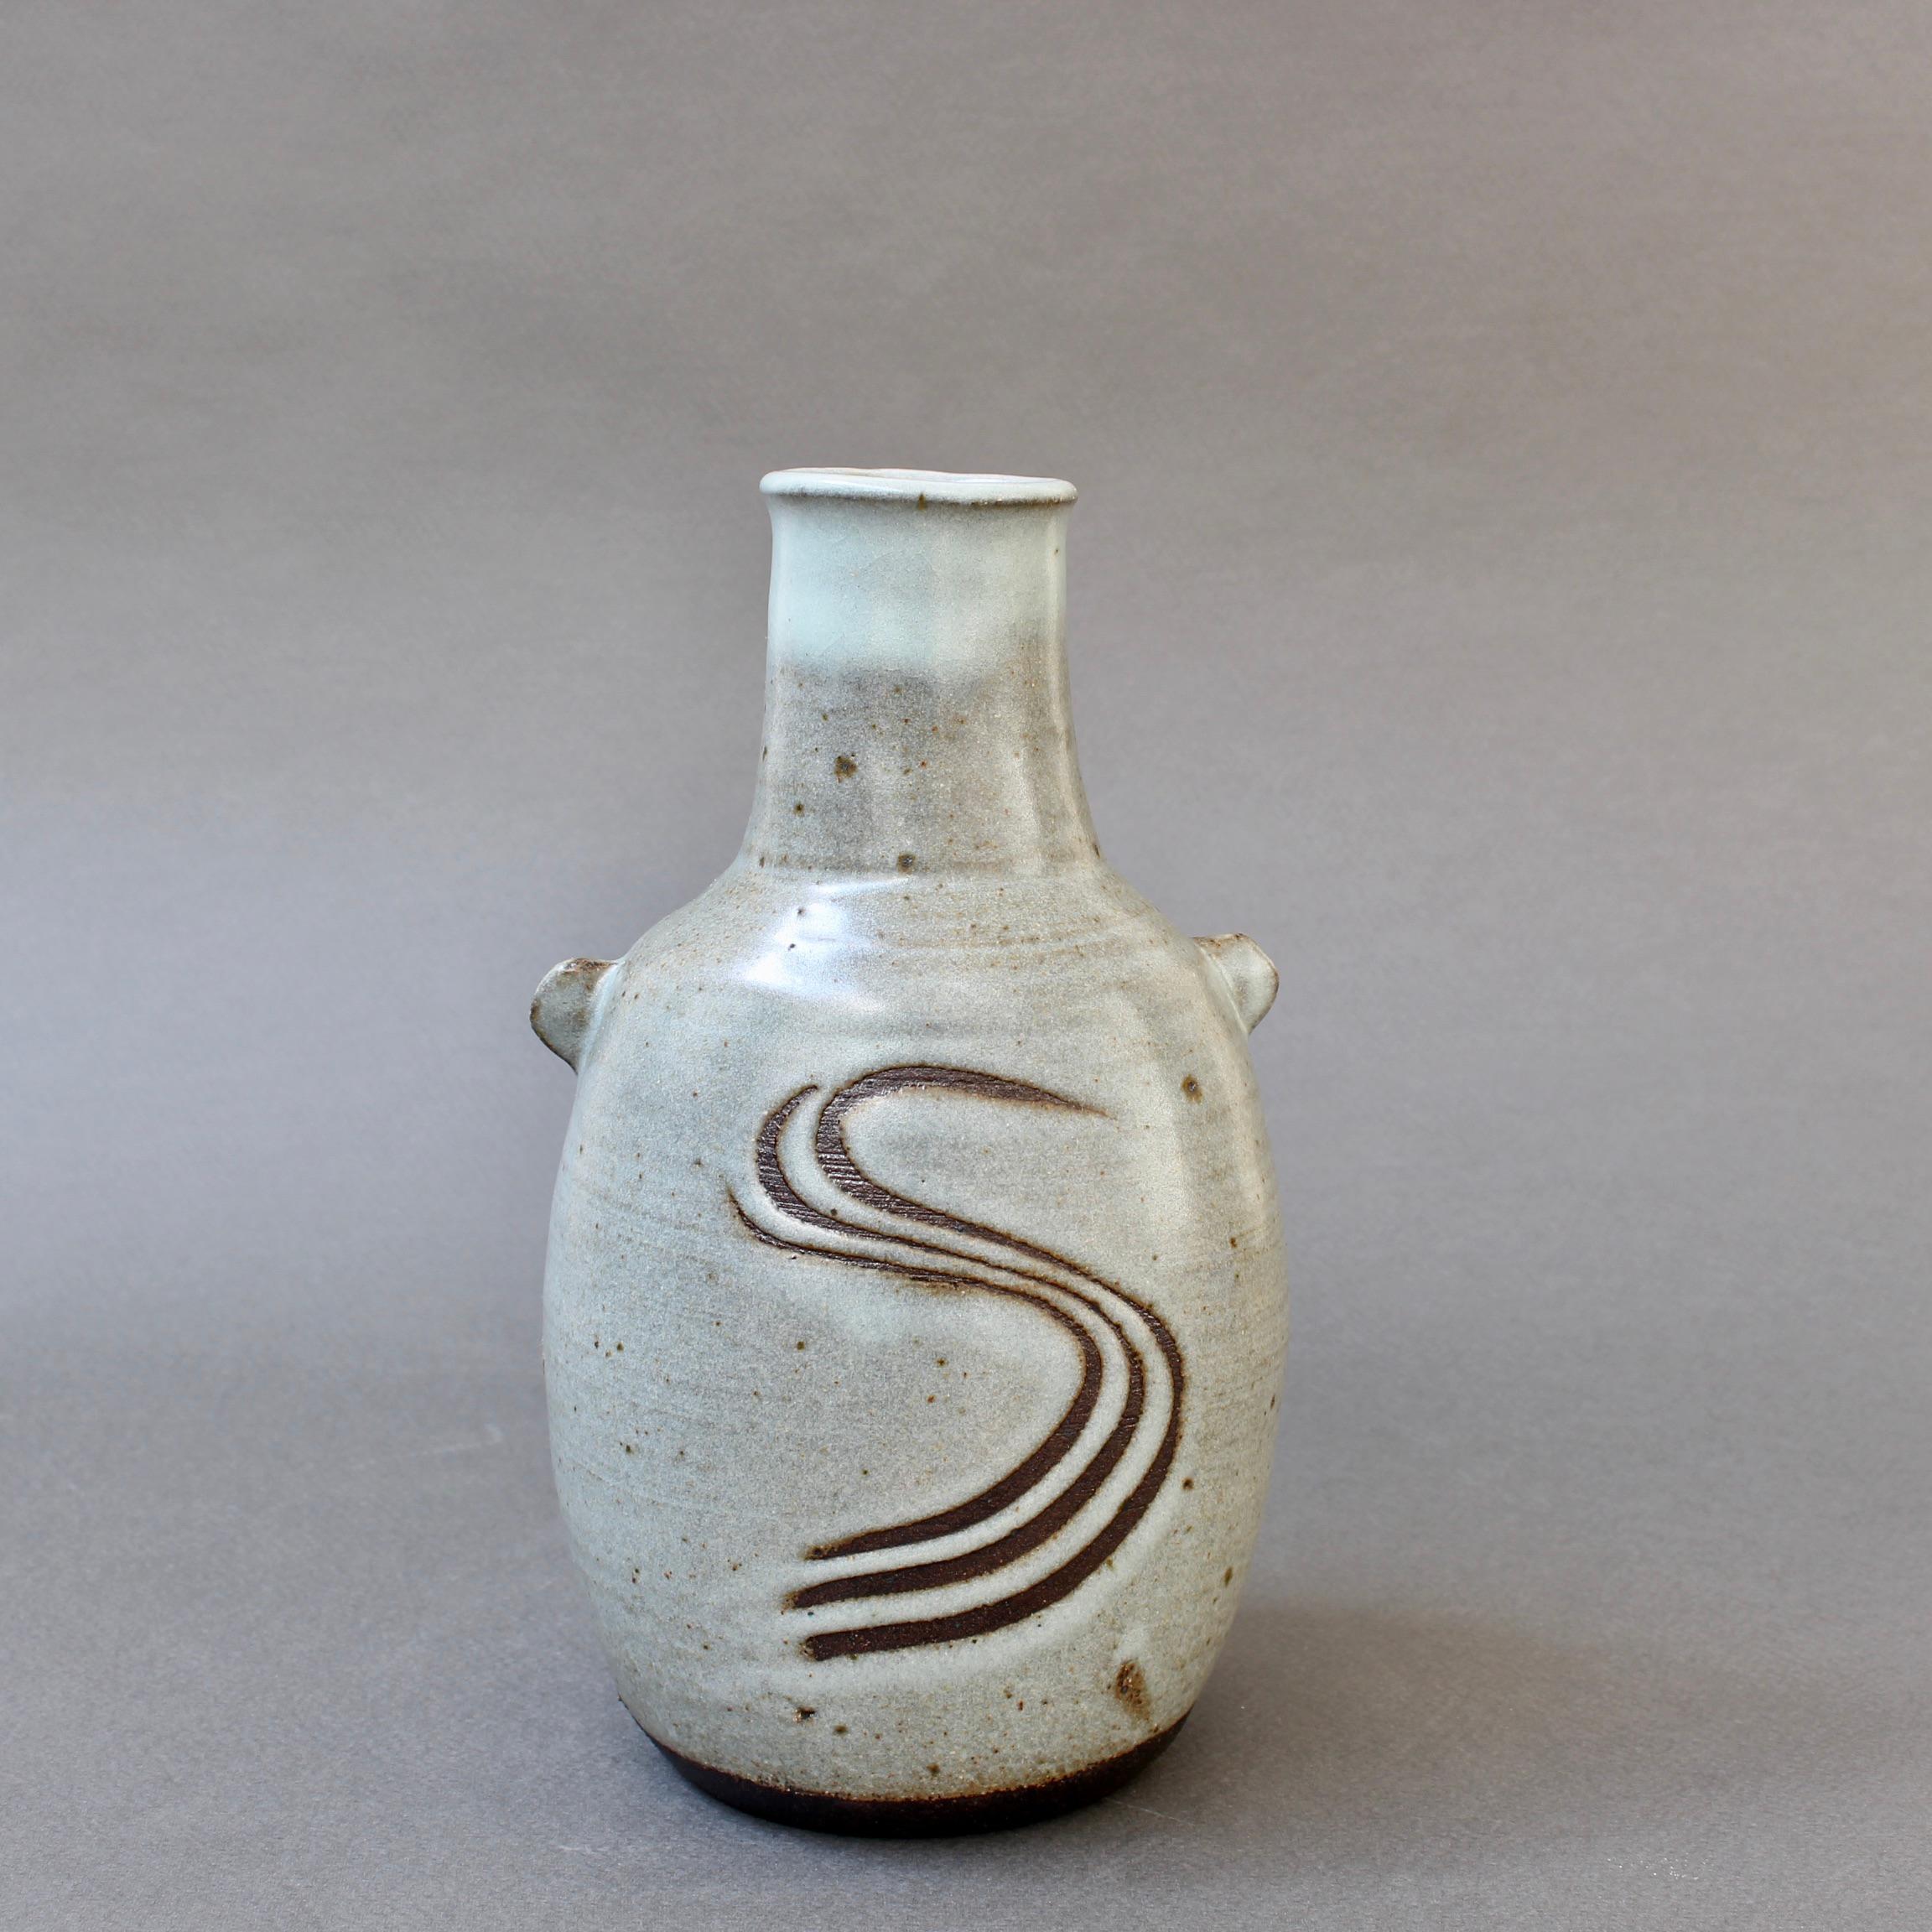 Vintage Japanese-style ceramic vase with lugs by Janet Leach (1981). Encompasses the beautiful simplicity of Zen and translated to a piece of pottery. The S on the ash-glaze body of the piece is reminiscent of a rake mark in a Zen garden not unlike